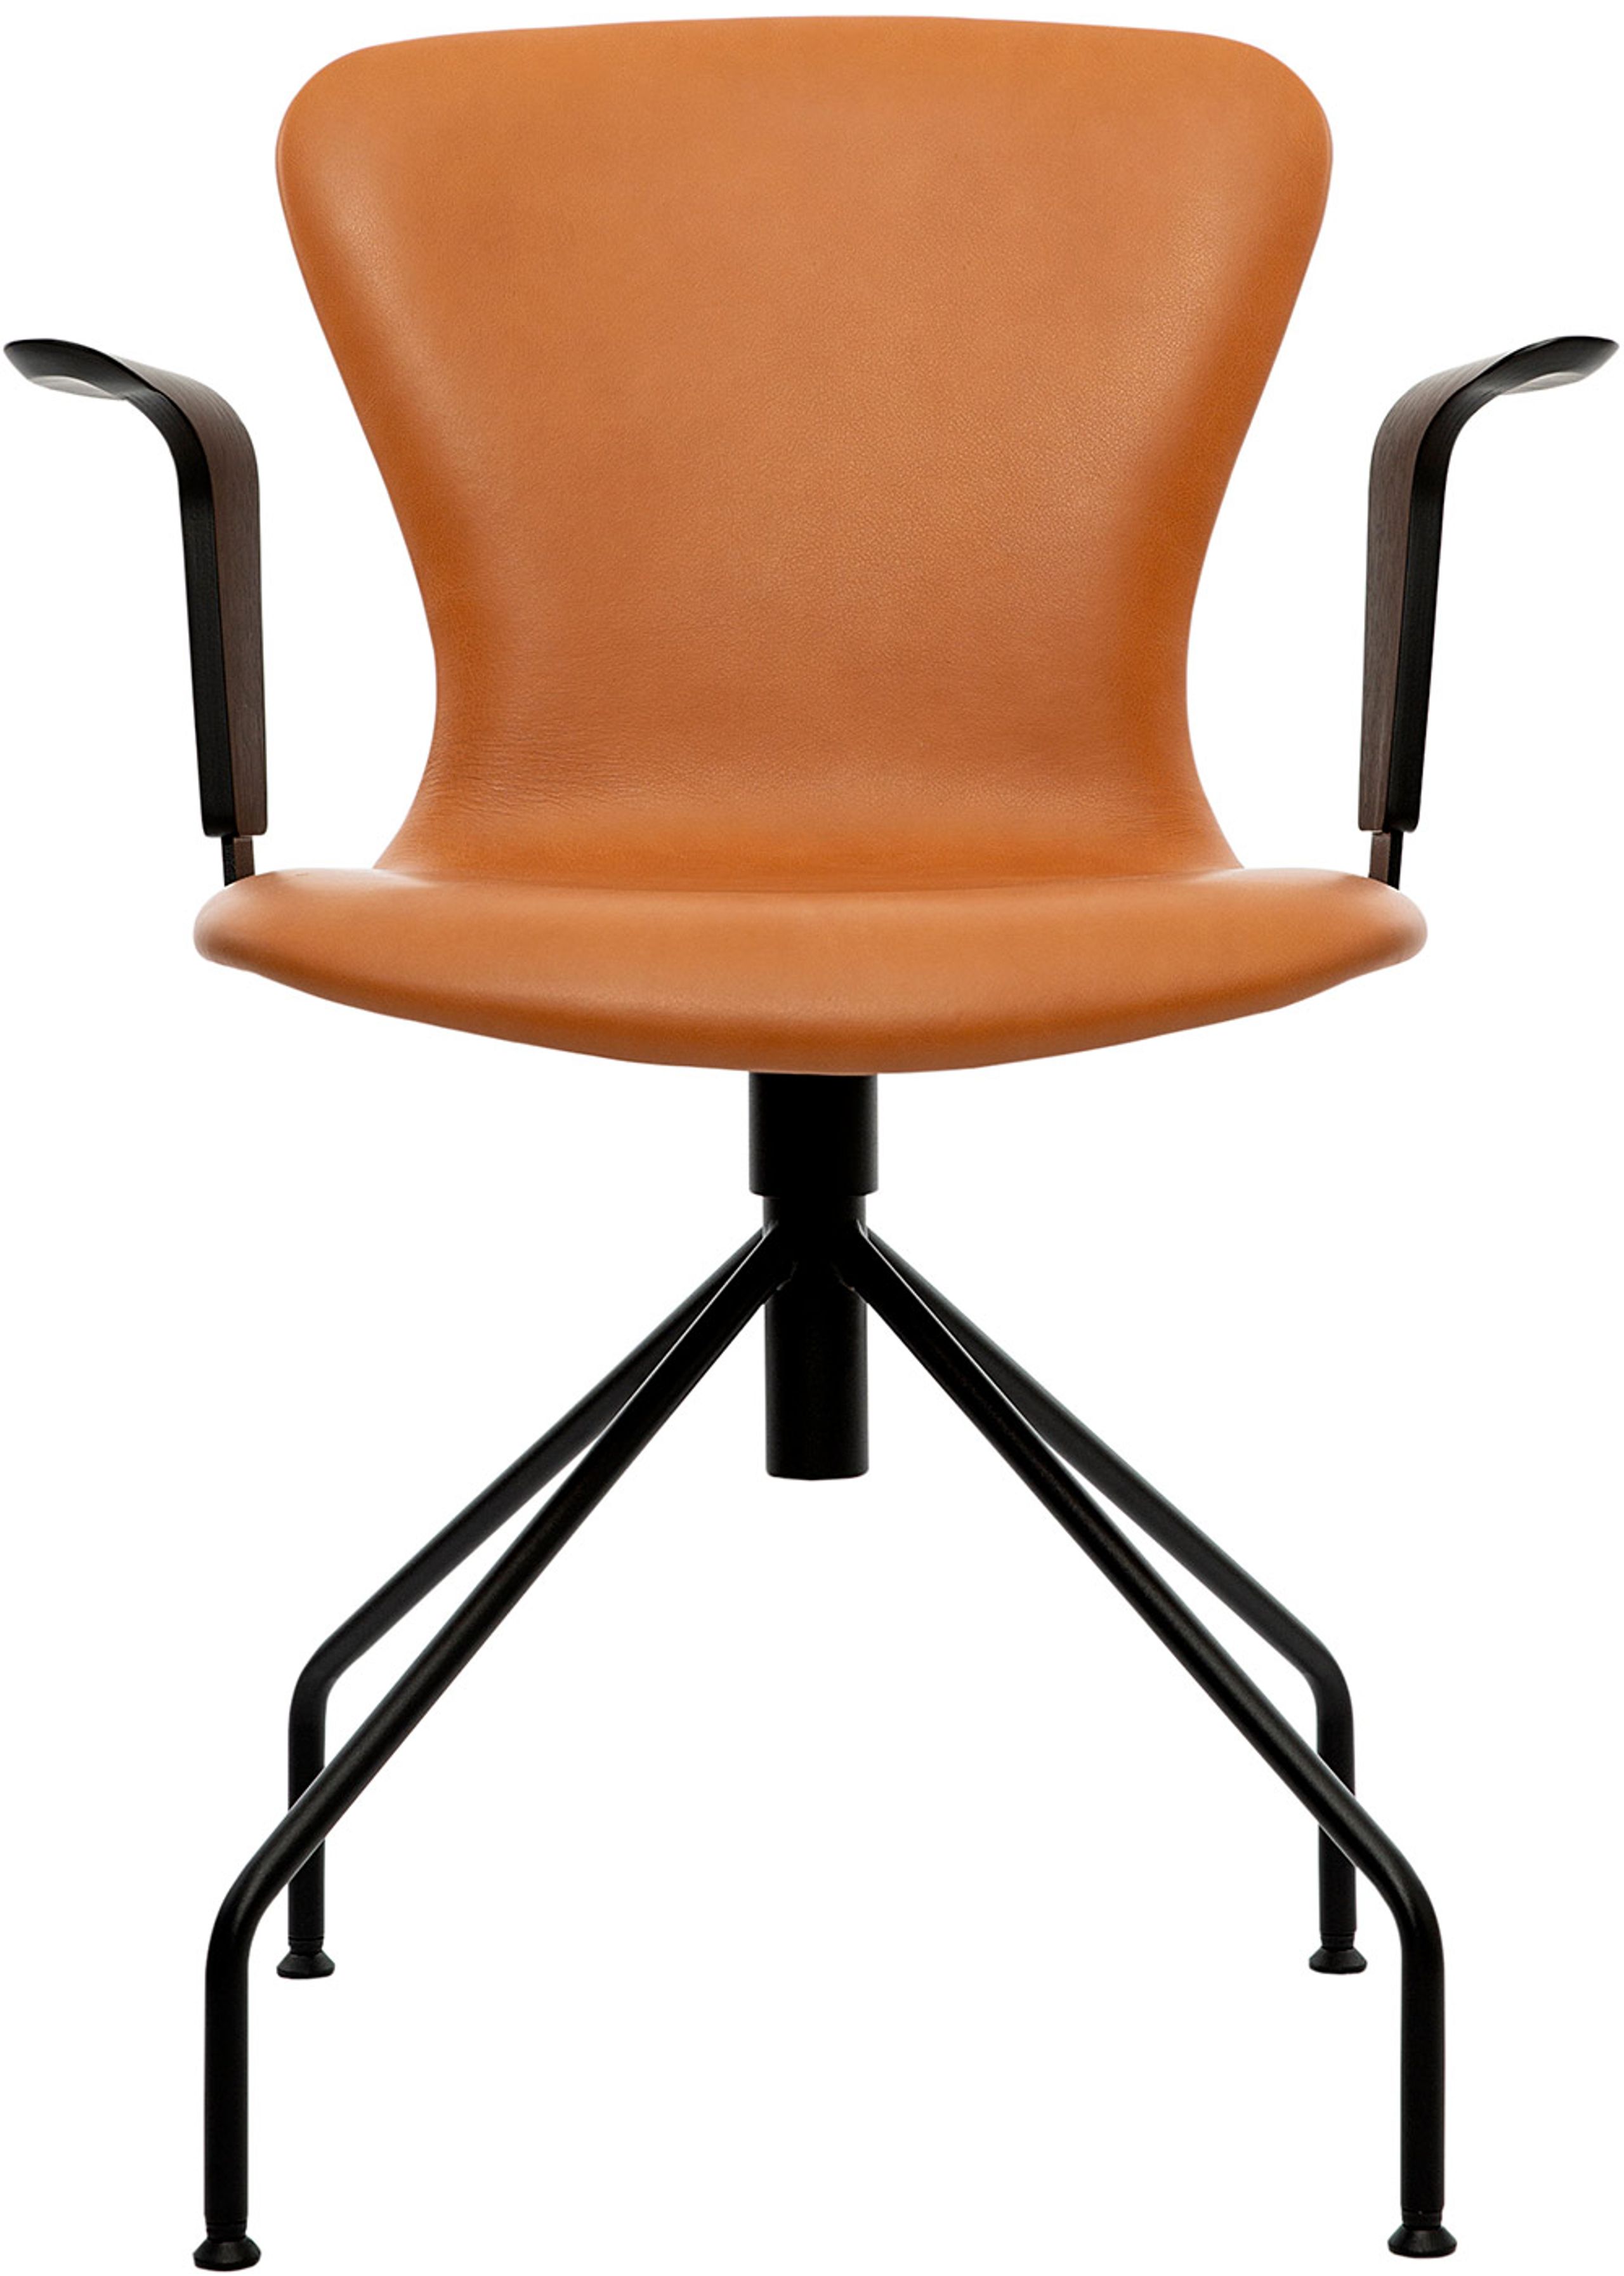 Bruunmunch - Chaise - PLAY Arm chair Swing - Fully Upholstered: Cognac Hero Leather